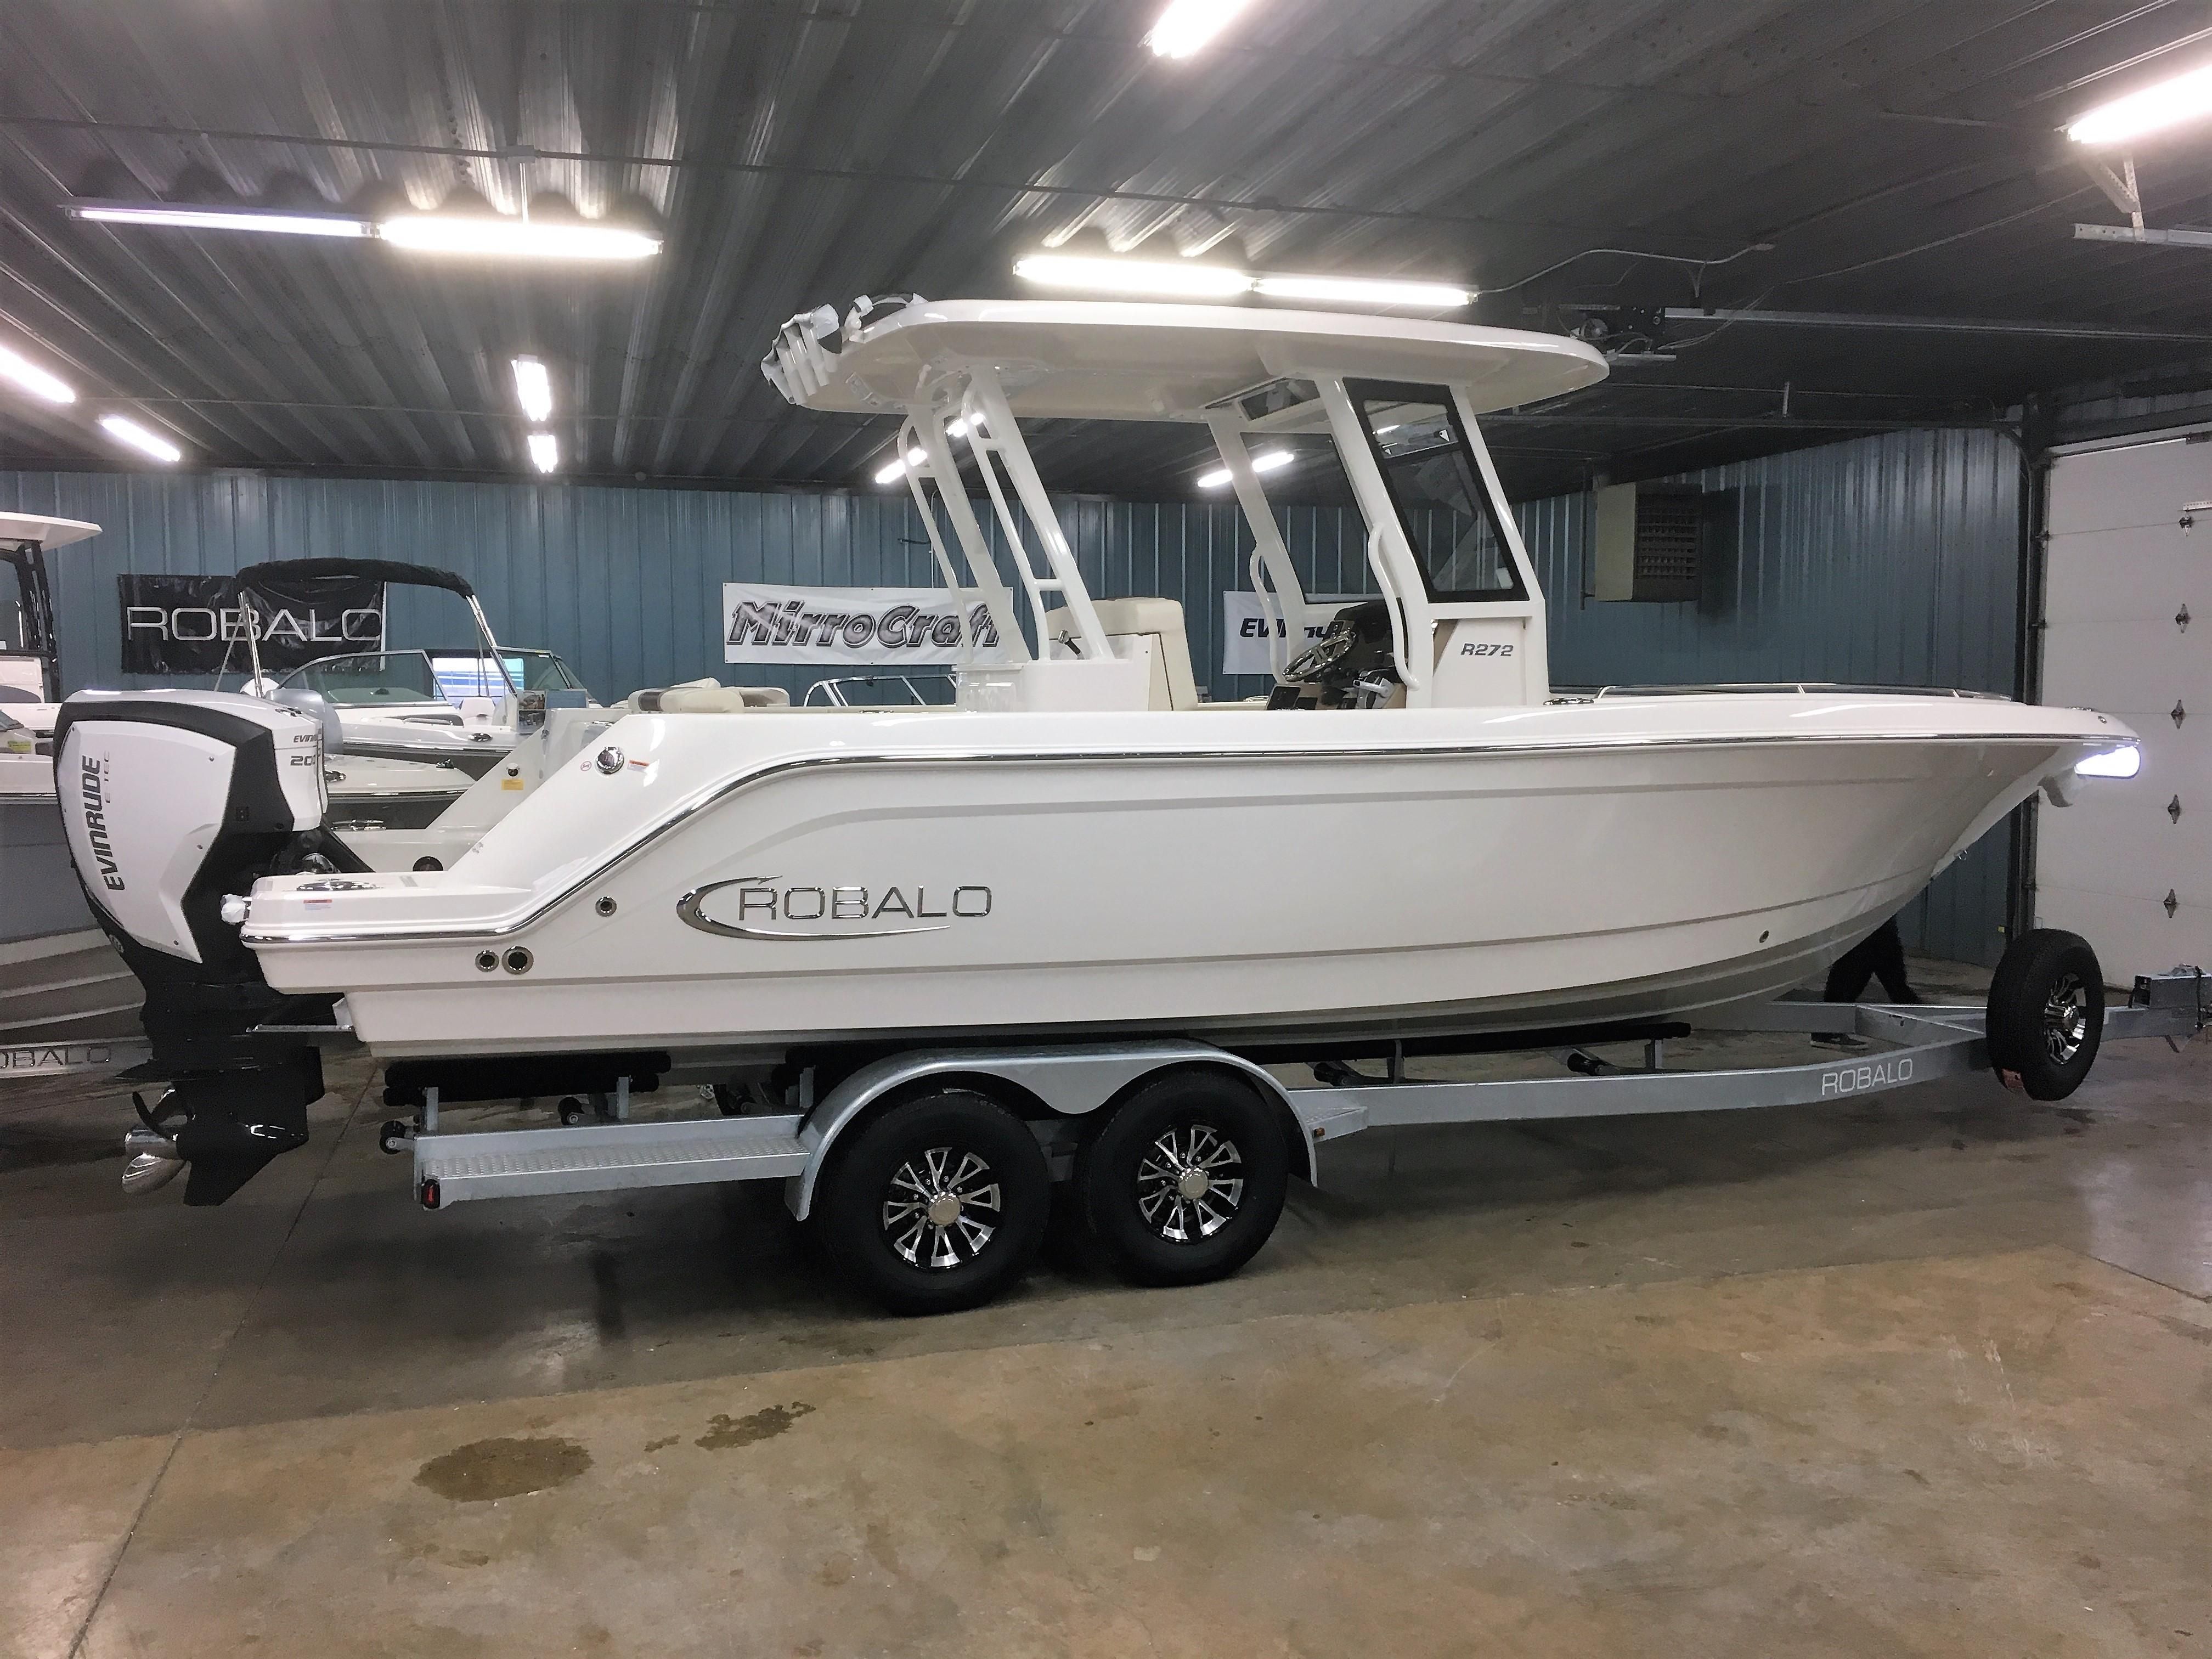 2019 Robalo R 272 Power Boat For Sale - www.yachtworld.com wiring a radio in a boat 